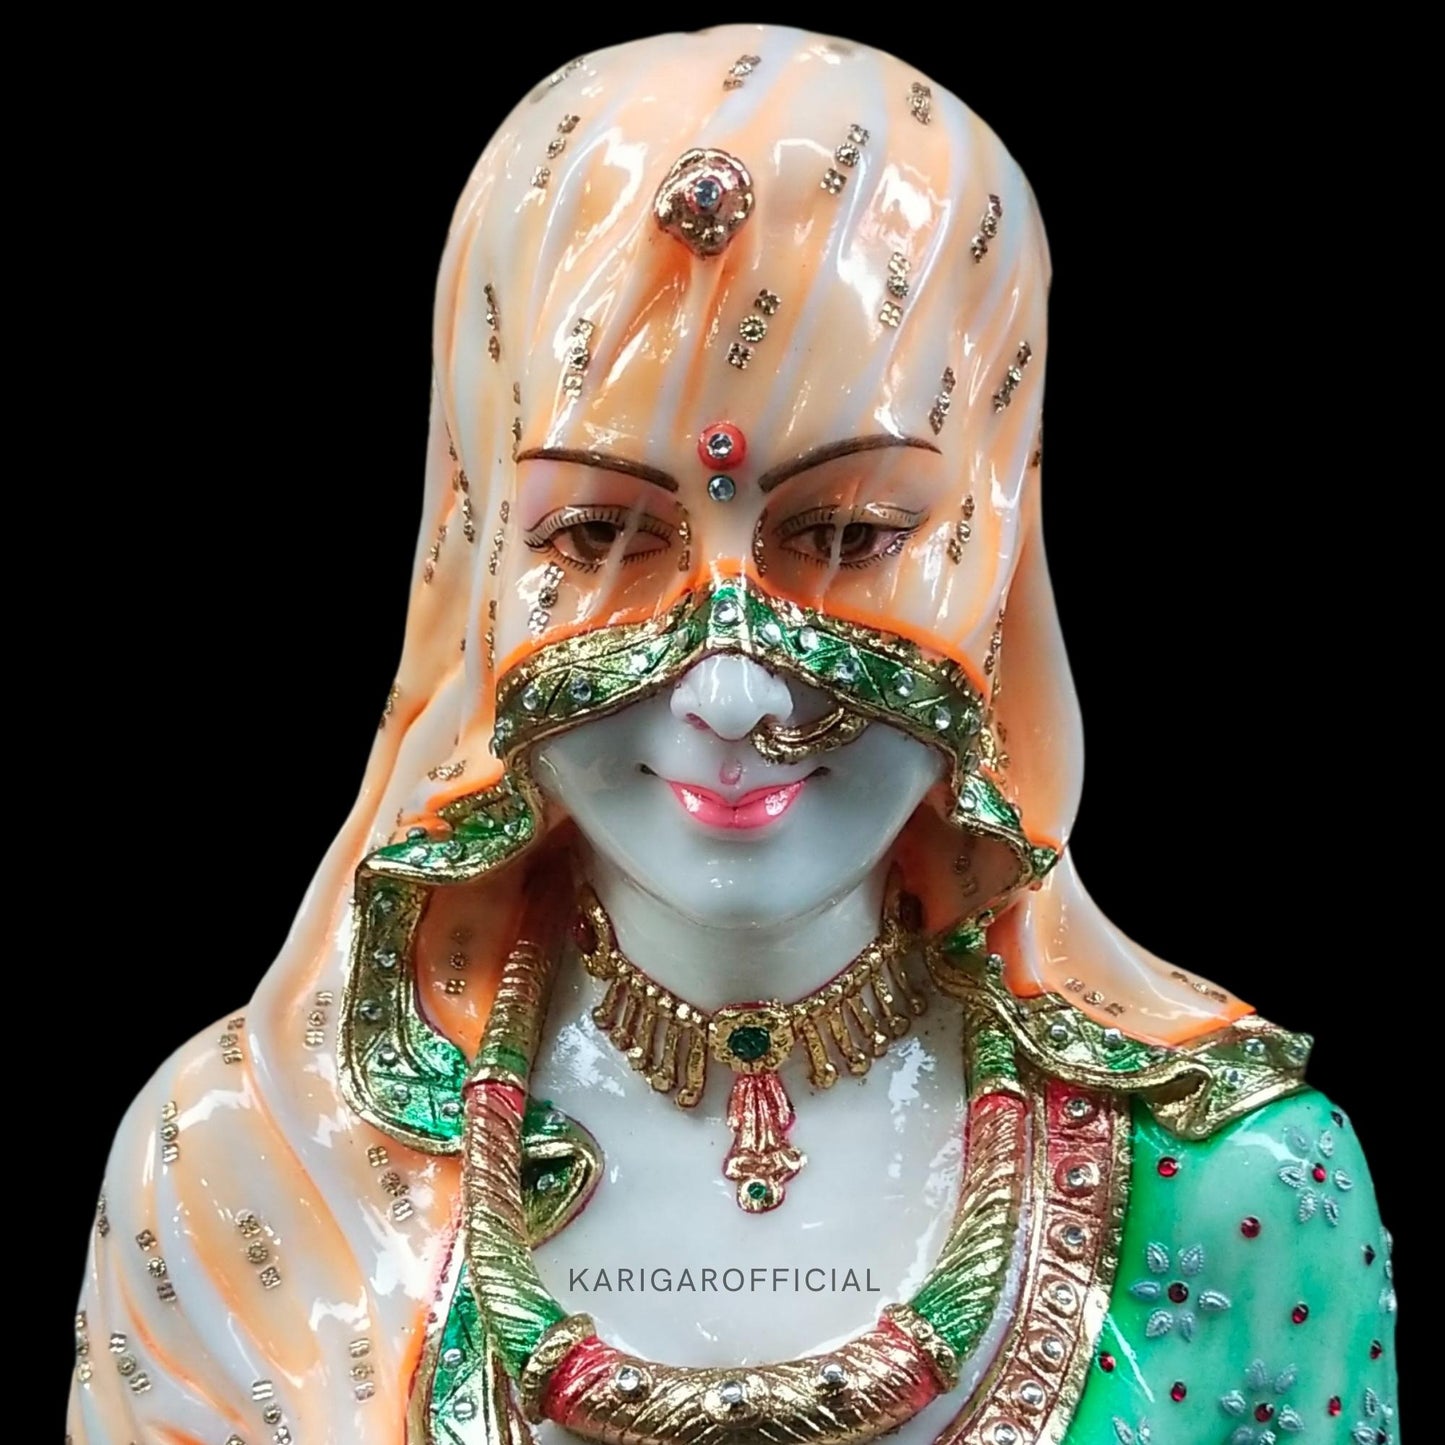 Bani Thani Bust Statue, Large 15 inches Murti, The Indian Mona Lisa Bust Marble Sculpture, Traditional Indian Women Figurine Bust, Multicolor Jewelry Clothes Figurine - Home Office Decor Gifts